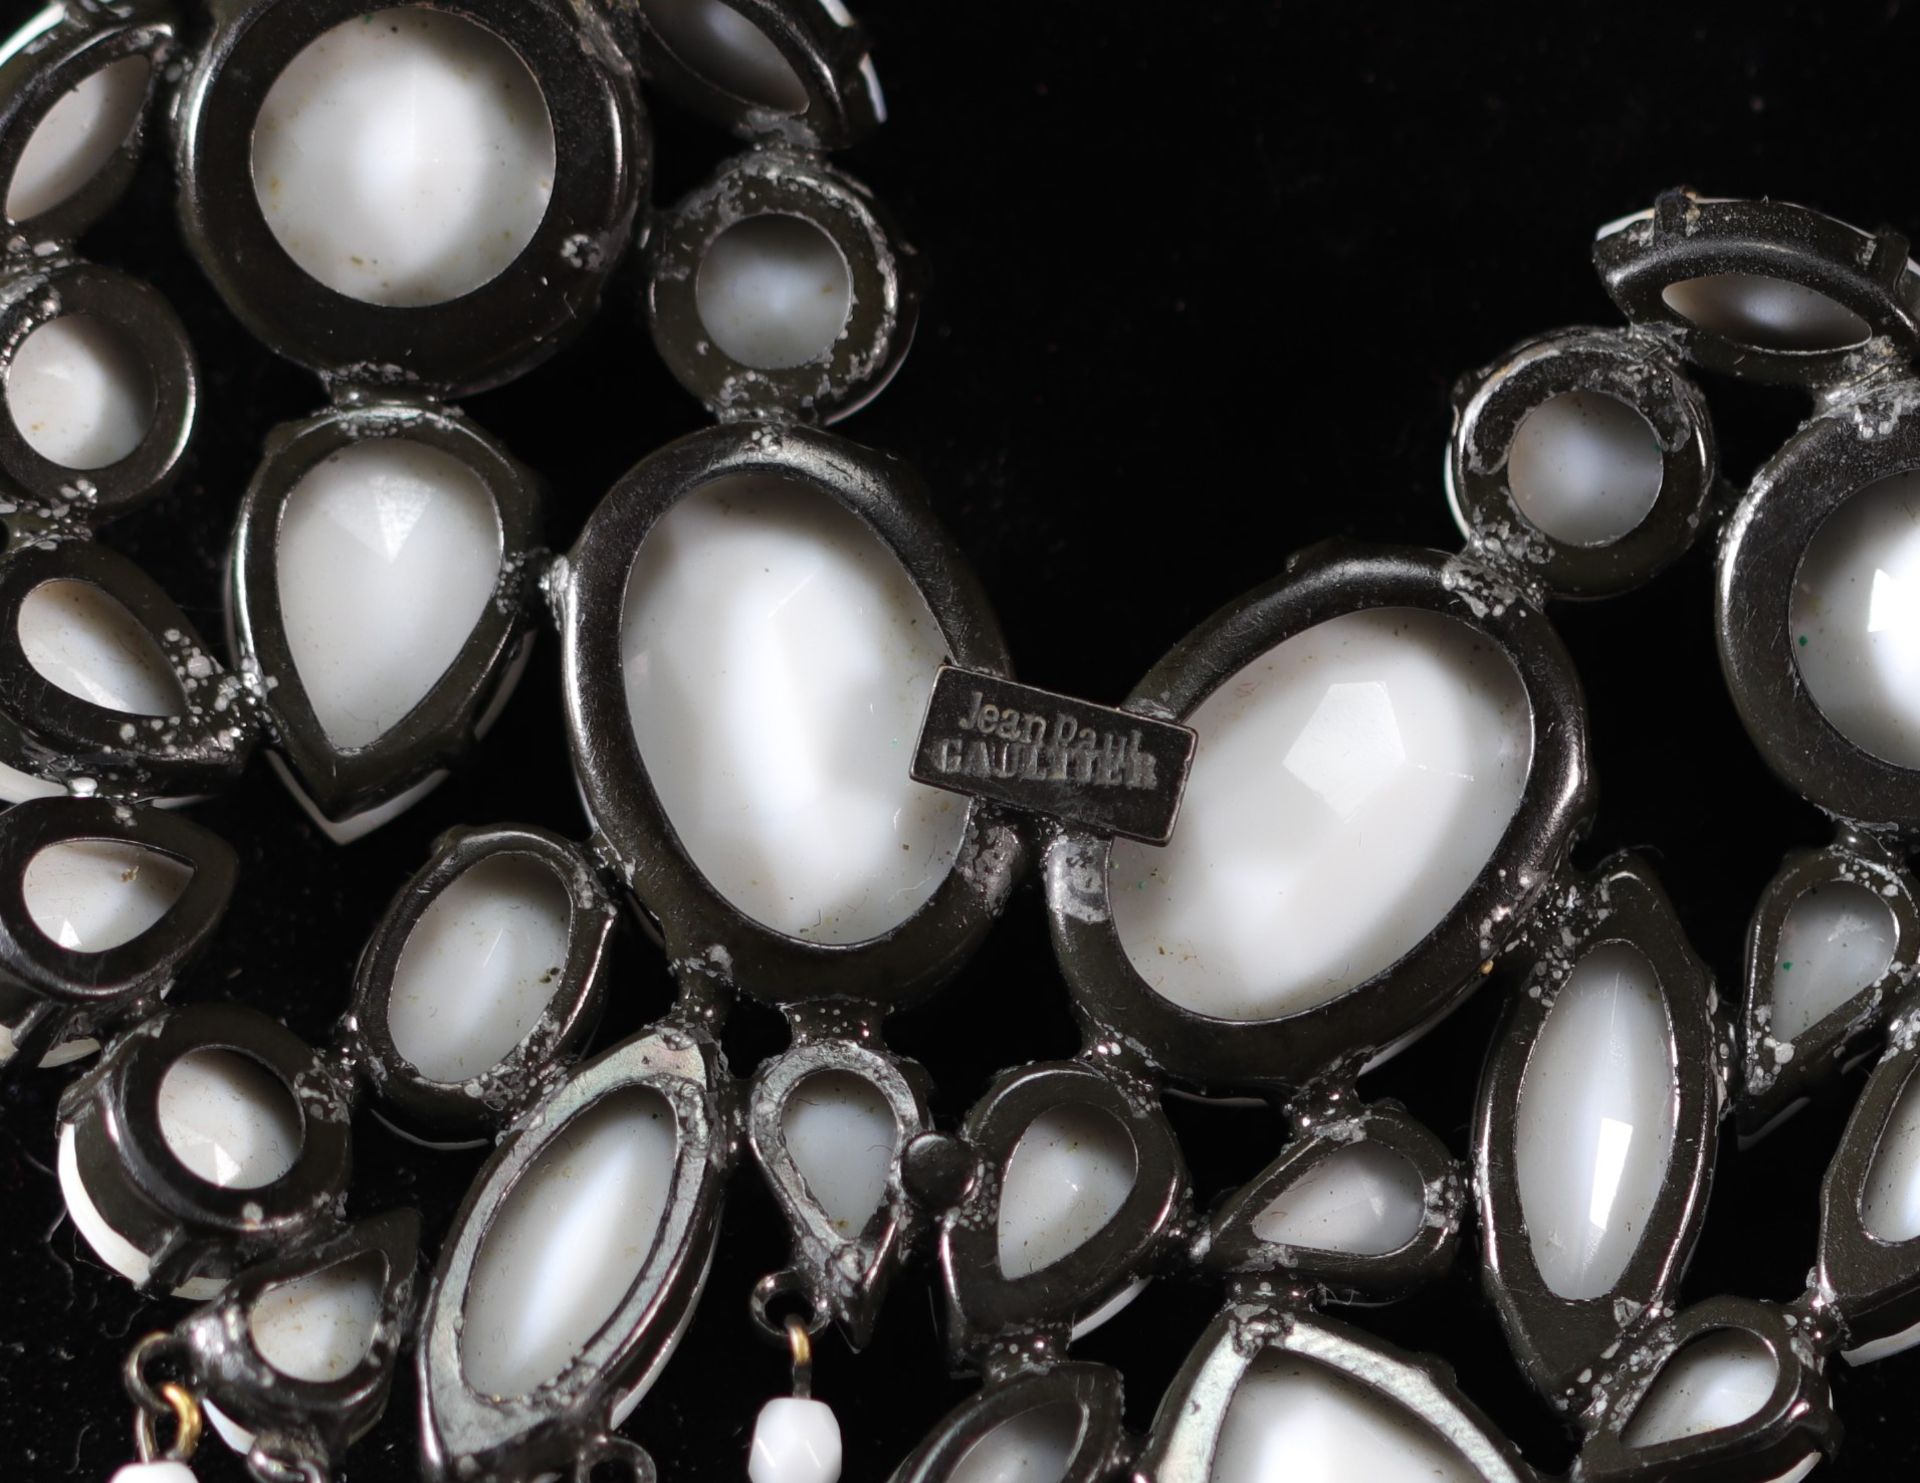 JEAN PAUL GAULTIER Necklace set with white glass paste cabochons - Image 3 of 3